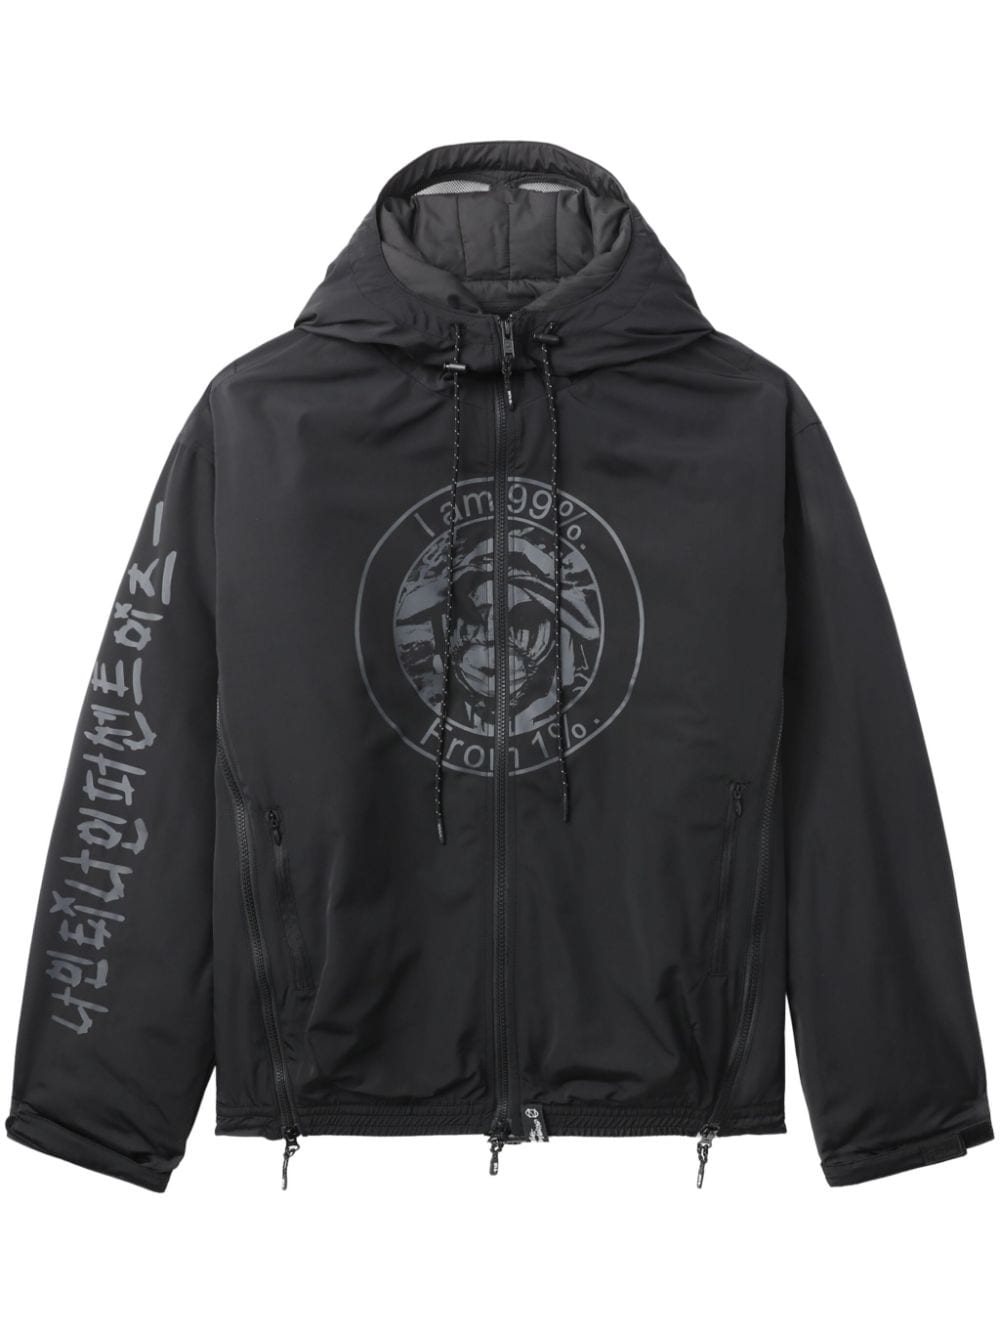 99% Is Our Faith hooded jacket - Black von 99% Is